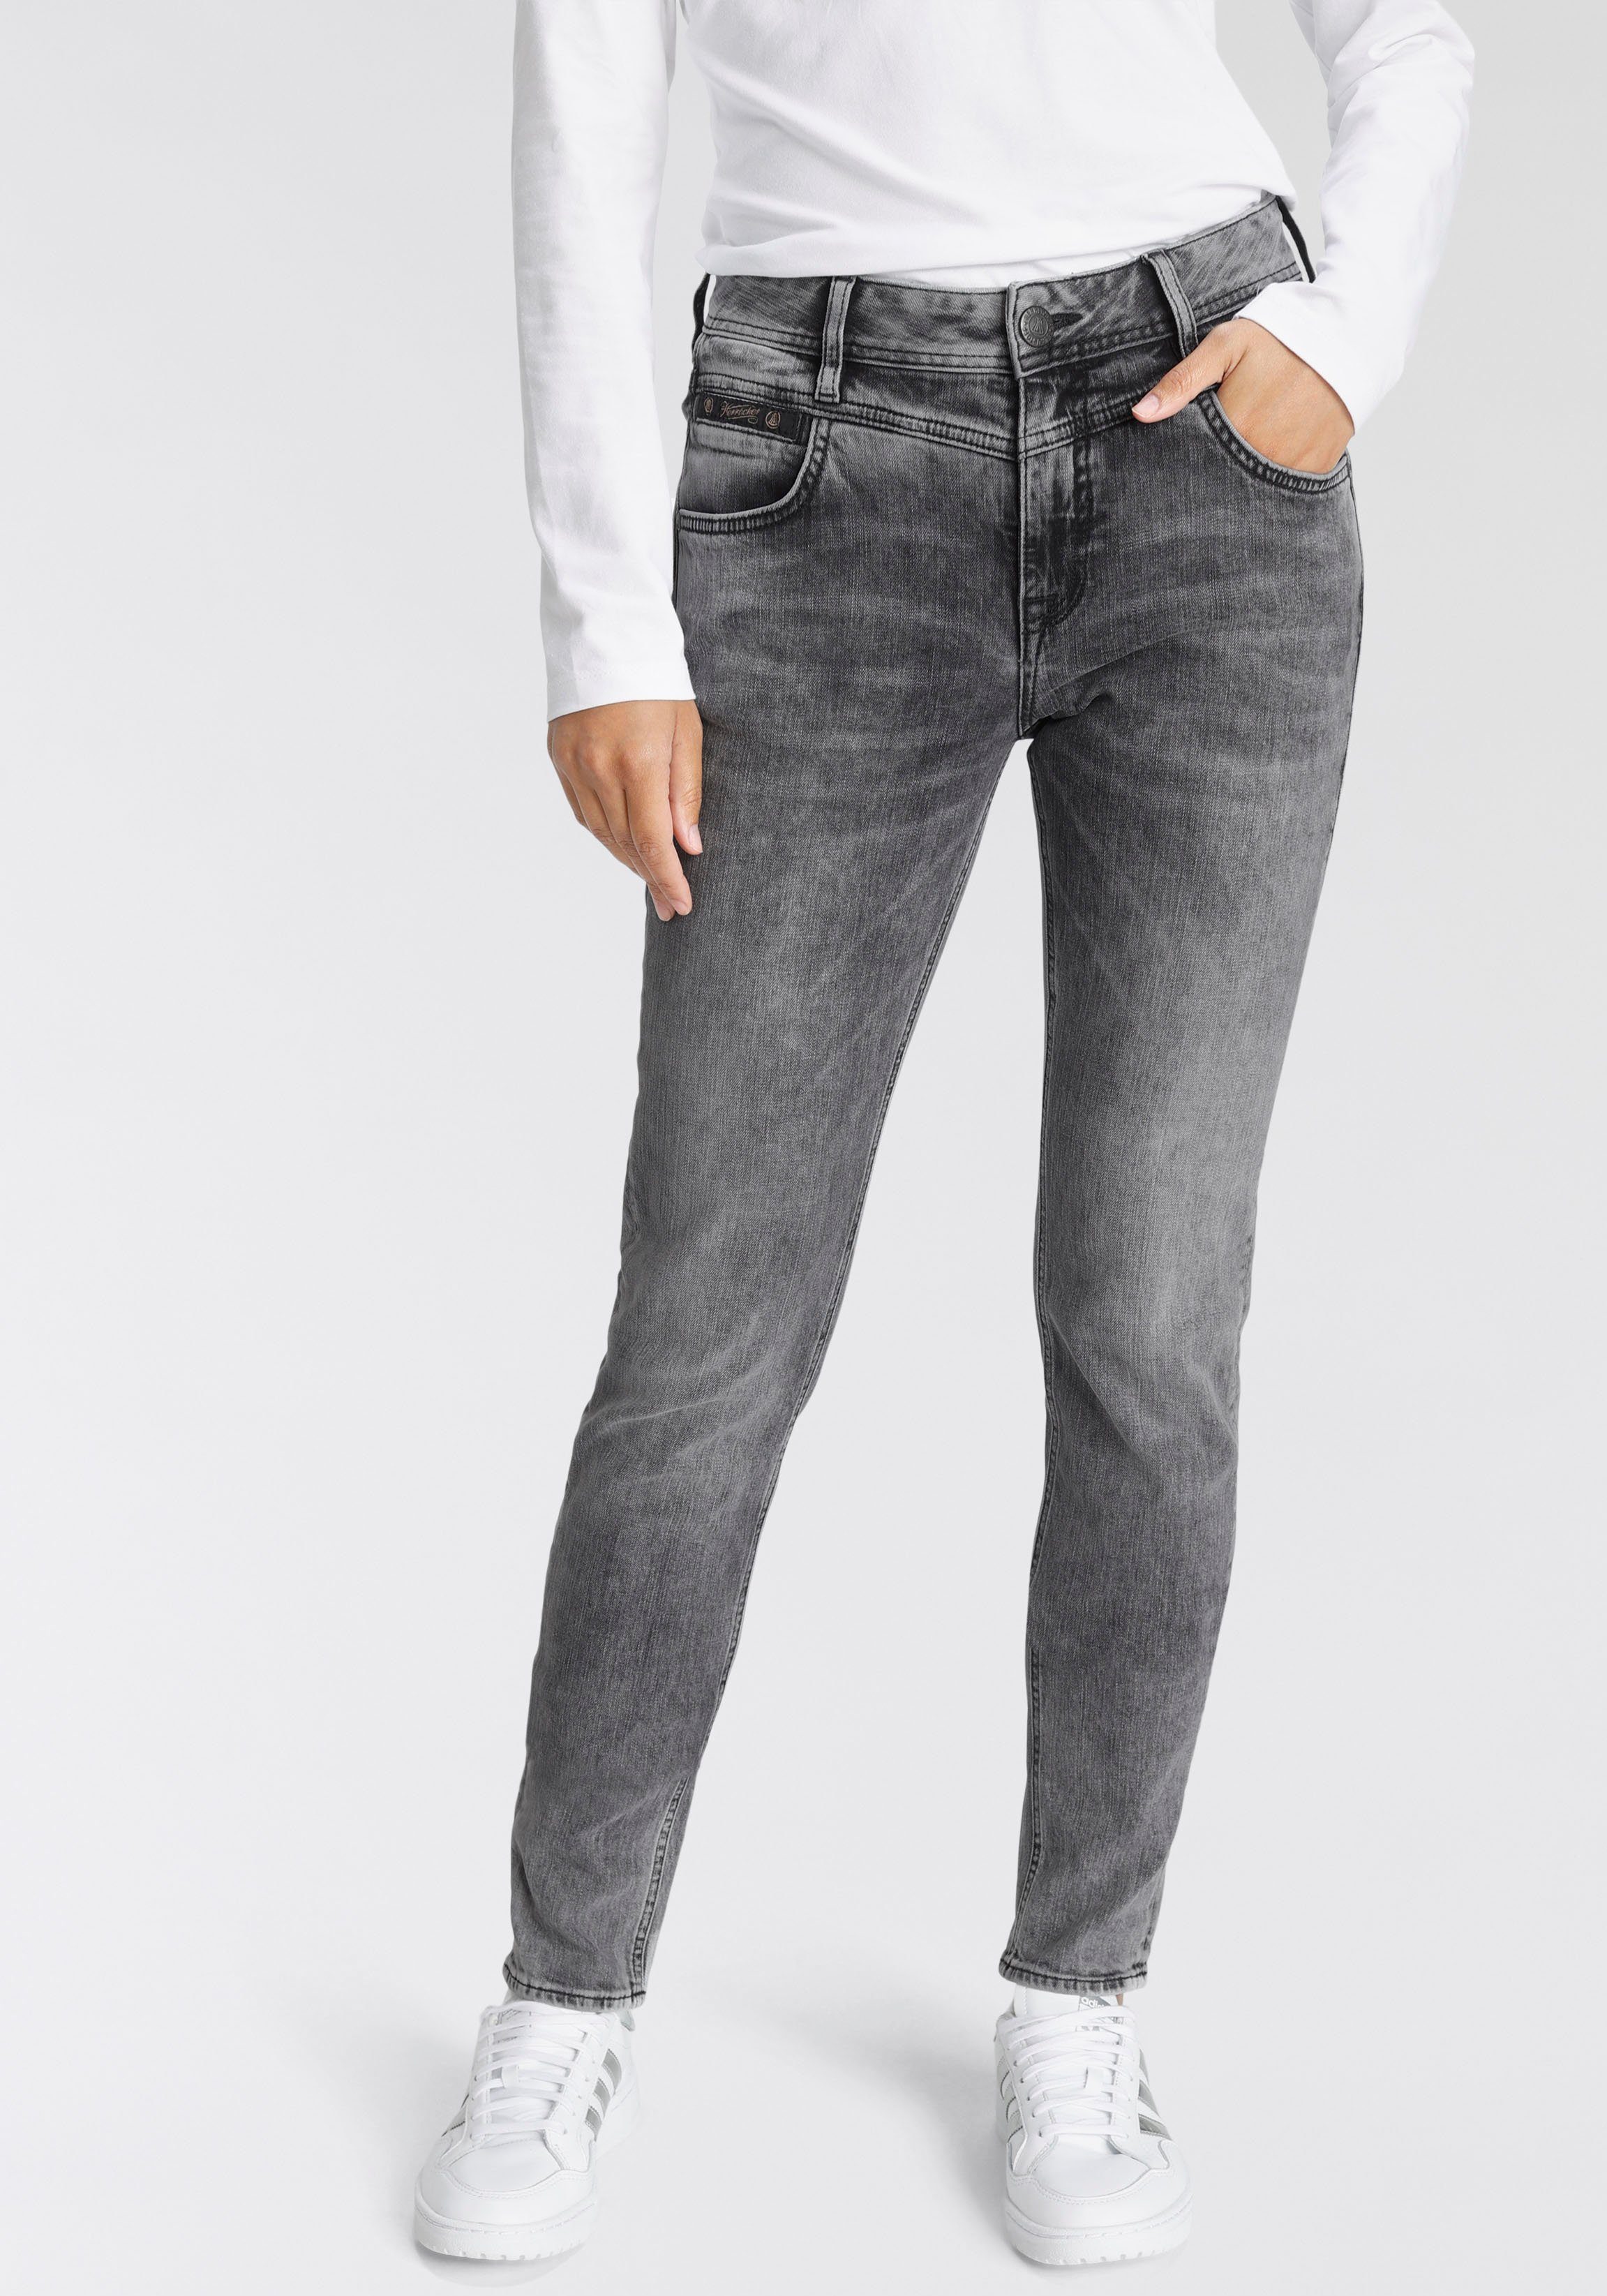 DENIM Herrlicher Slim-fit-Jeans Recycled Waist Normal RECYCLED Polyester 730 PEPPY SLIM silent